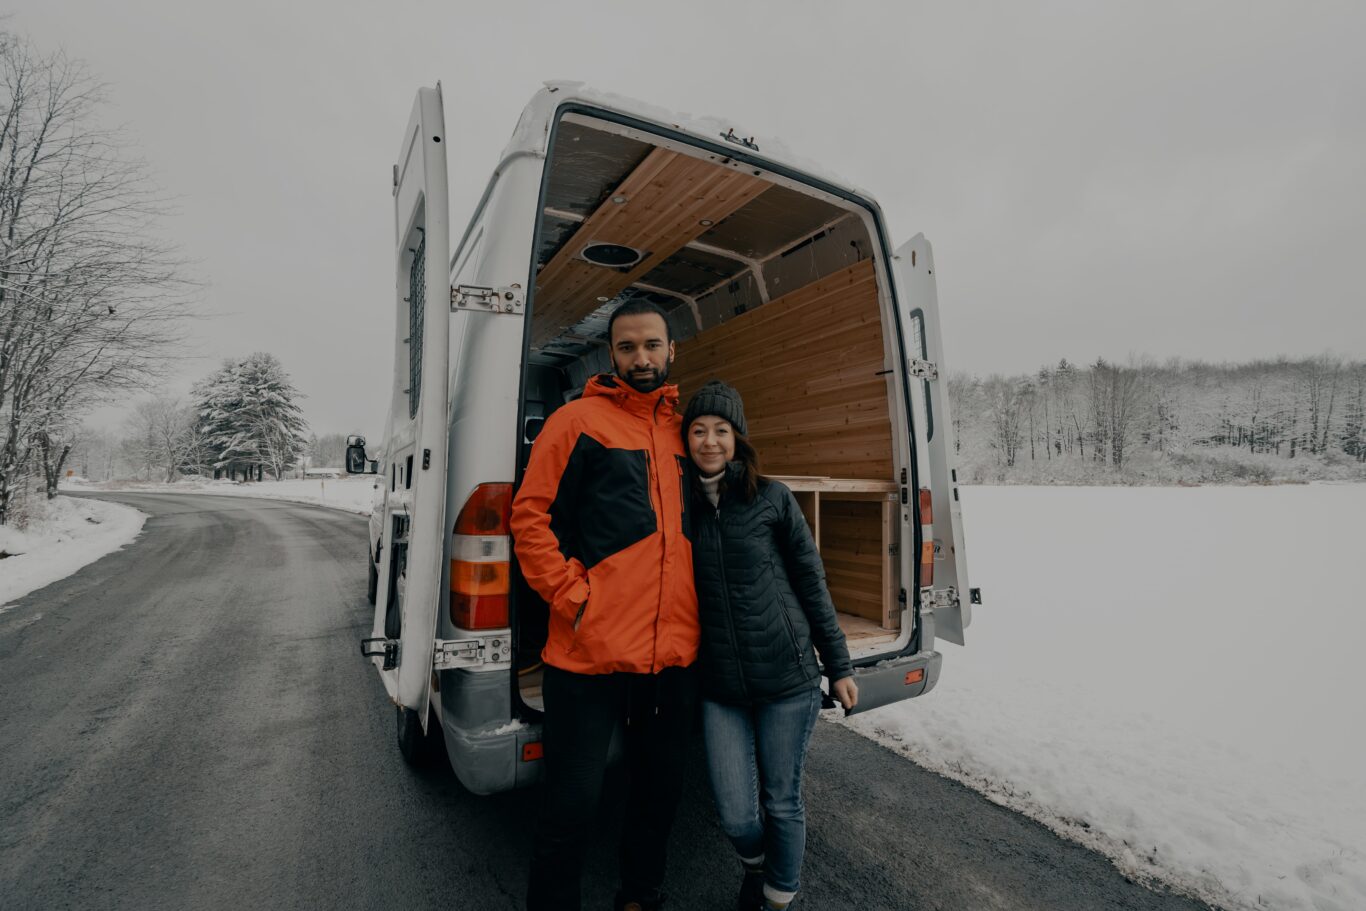 Couple RVing in the Snow